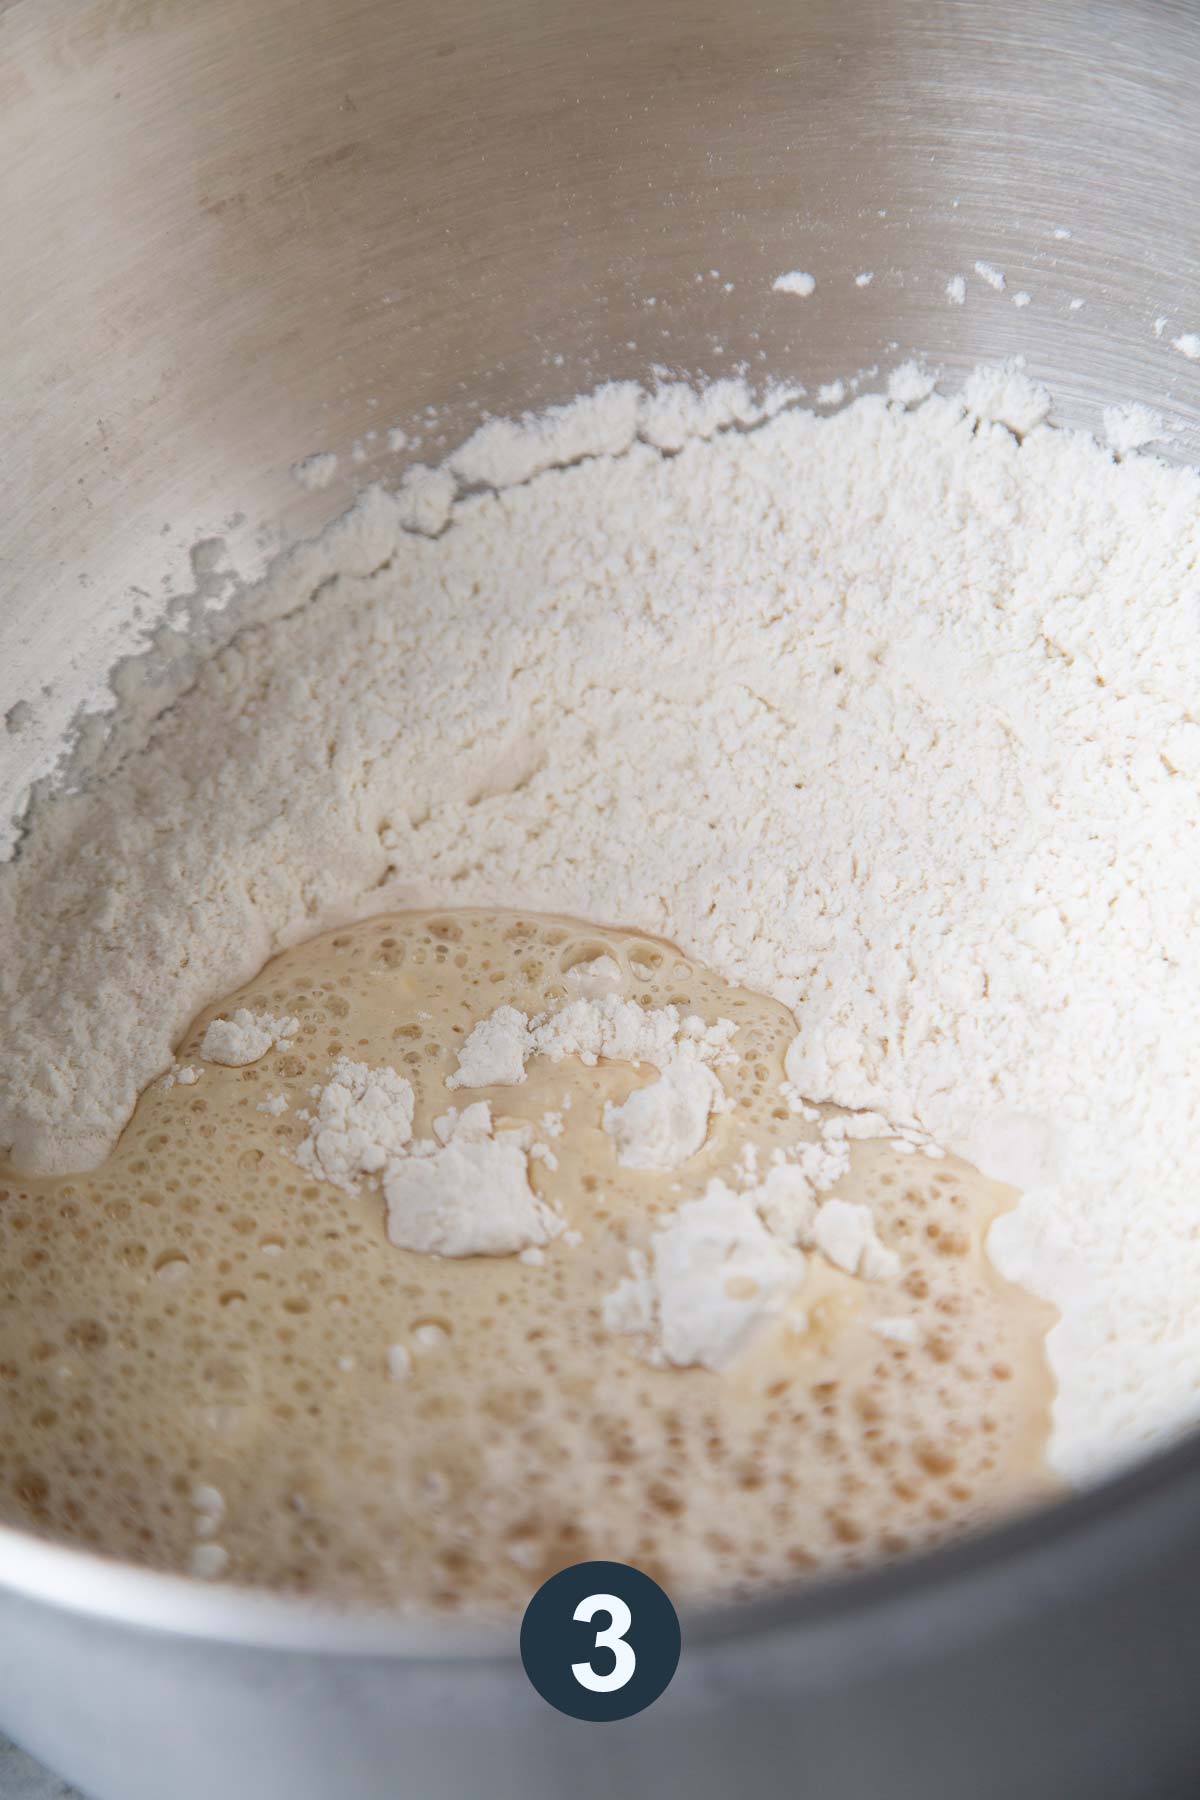 mix bread flour and yeast in a stand mixer with dough hook attachment.